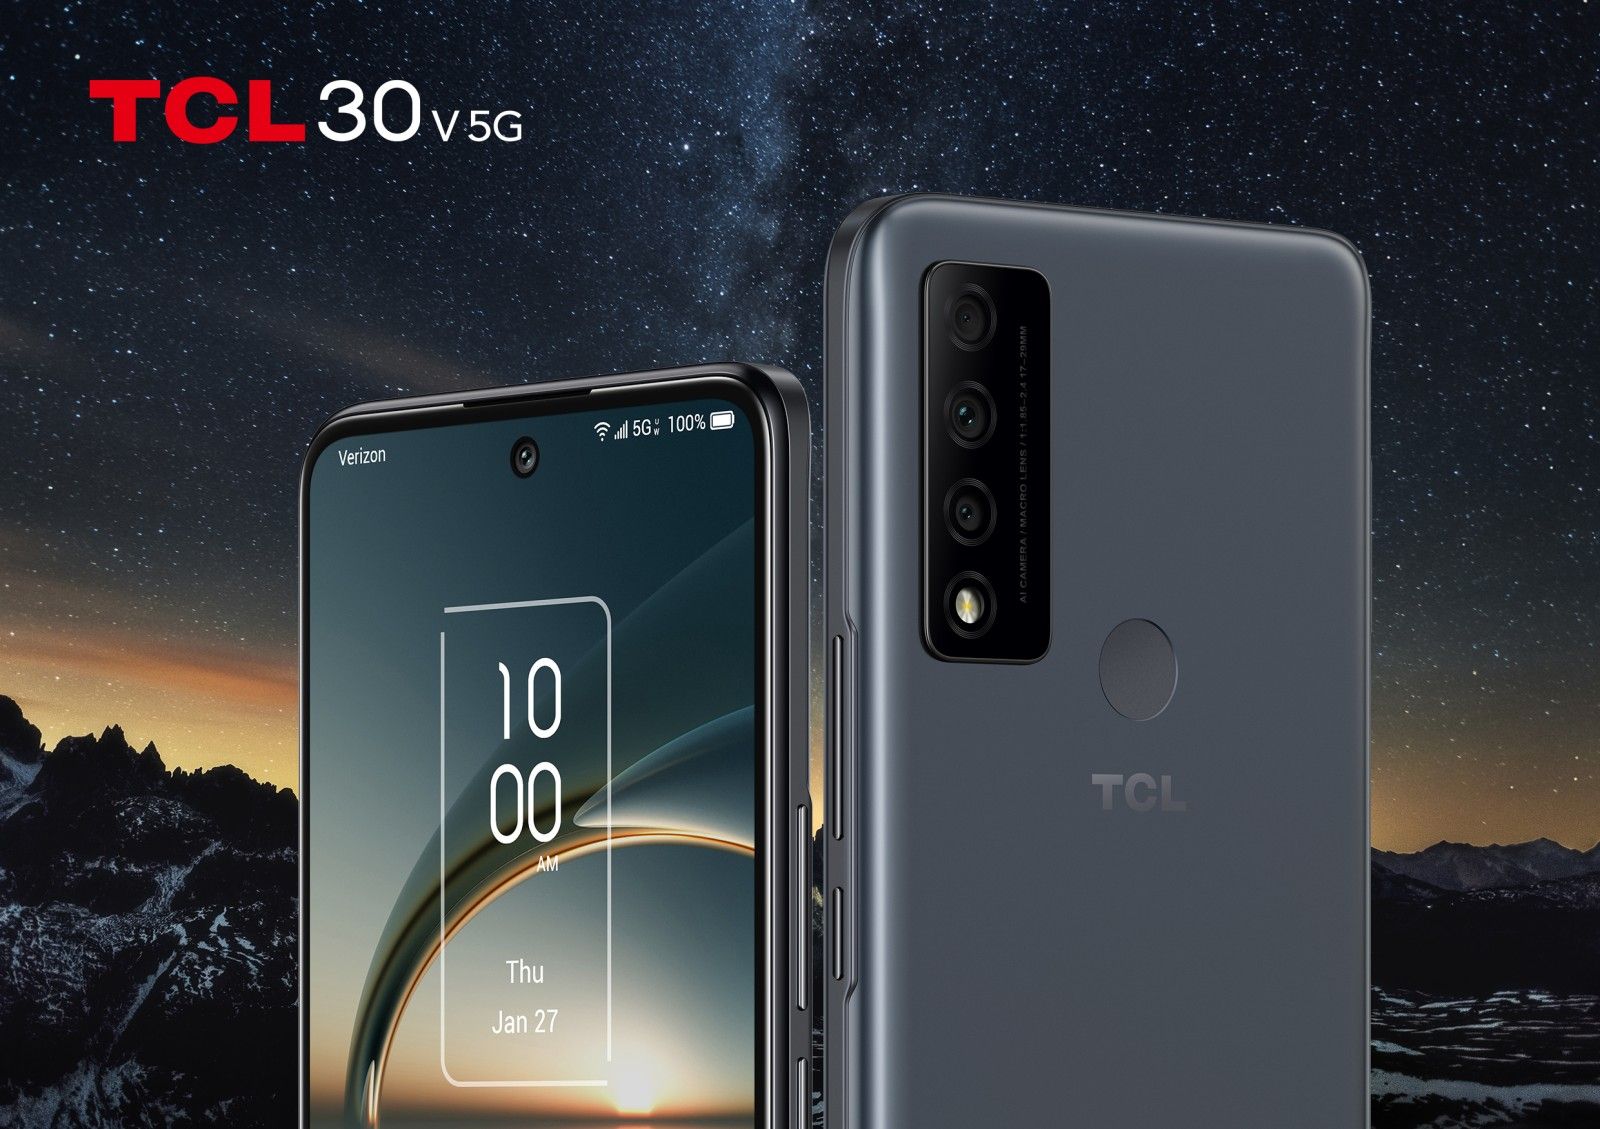 TCL 30 V 5G front and back